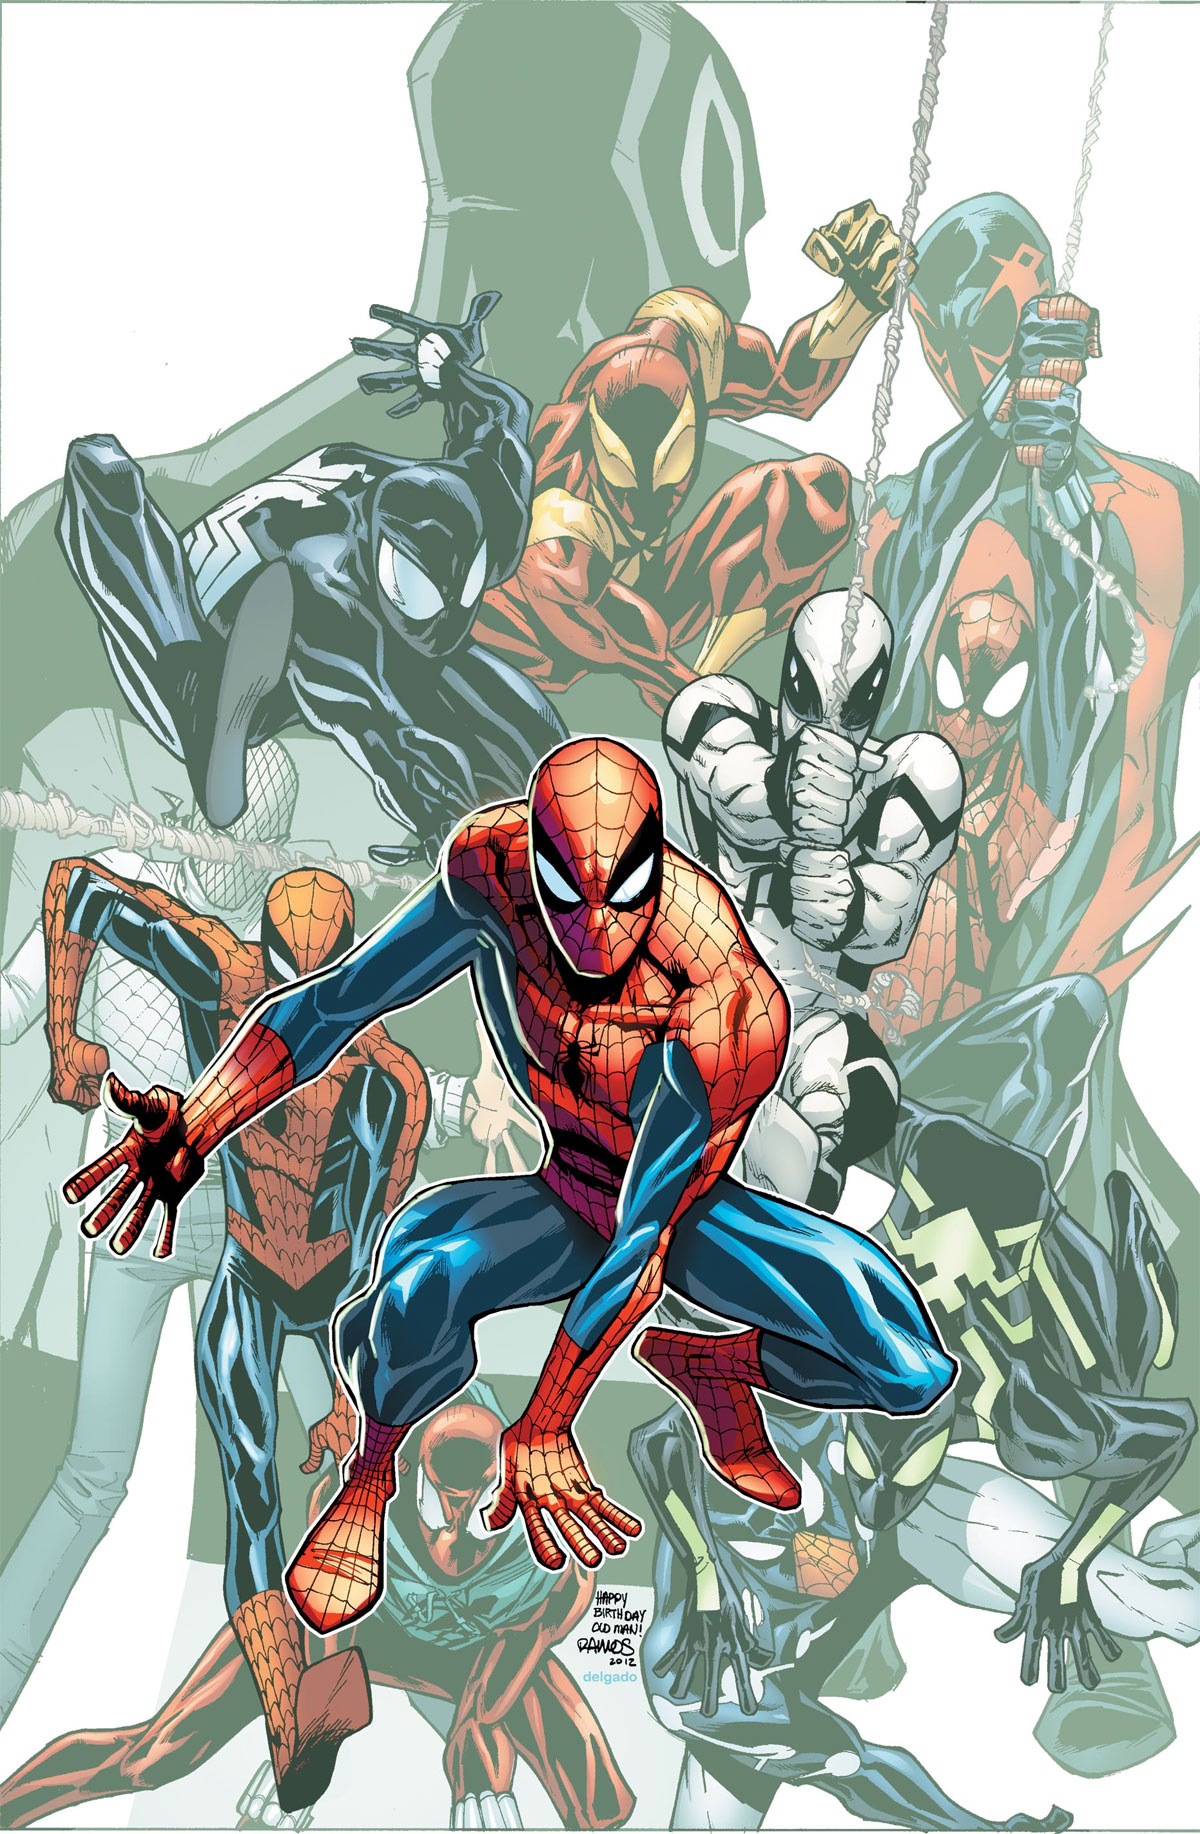 AMAZING SPIDER-MAN #692 Cover by HUMBERTO RAMOS